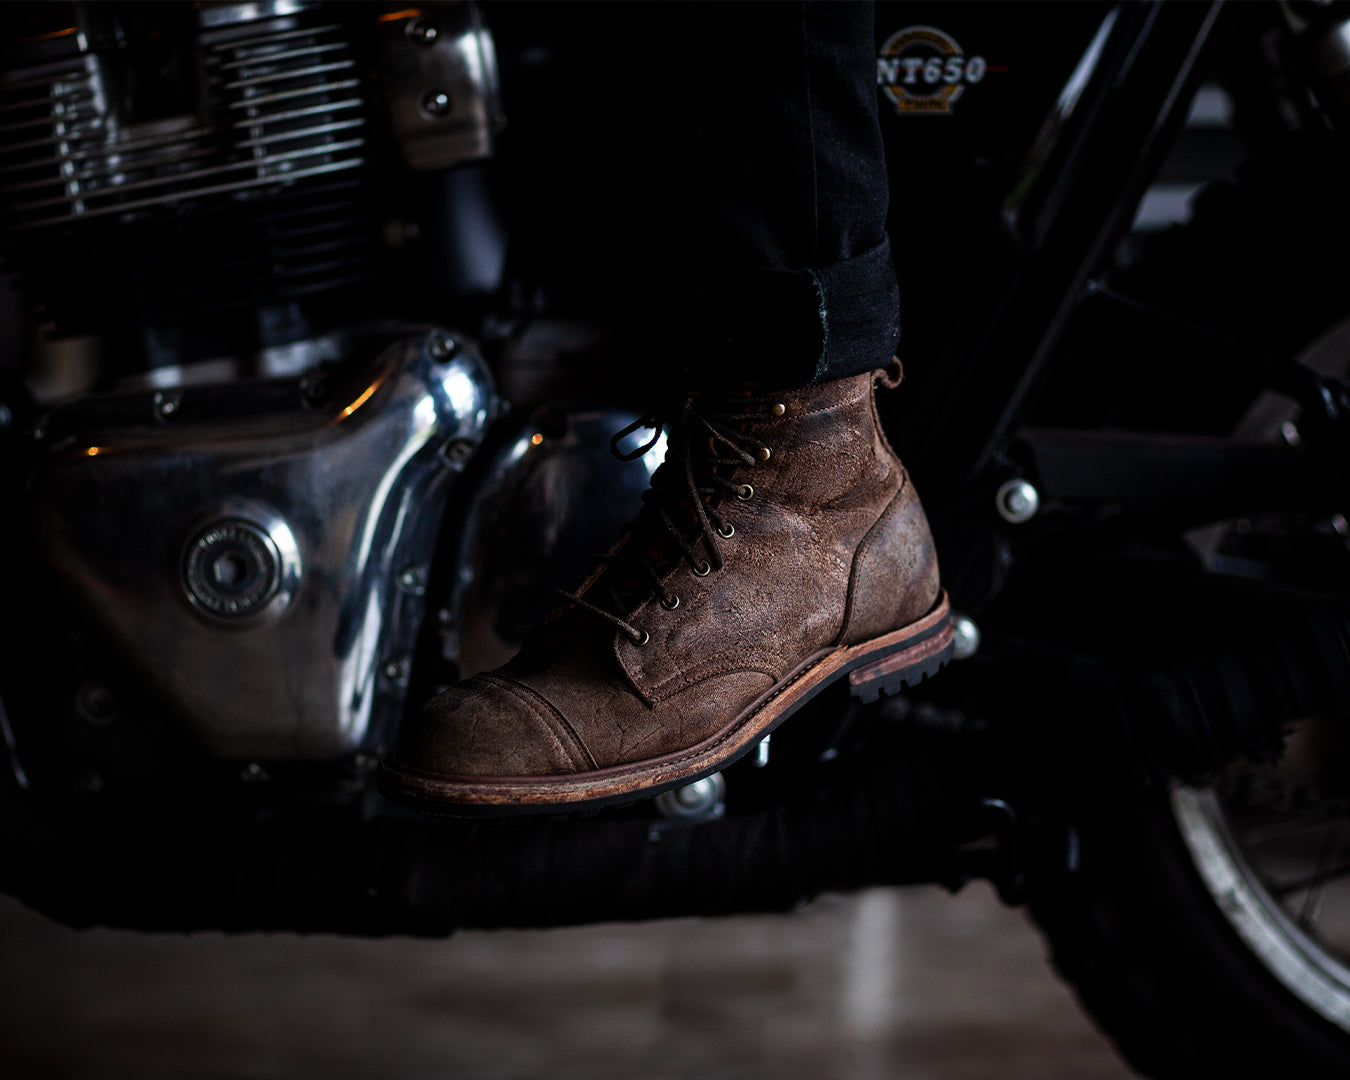 Stone Rambler: One boot that does it all